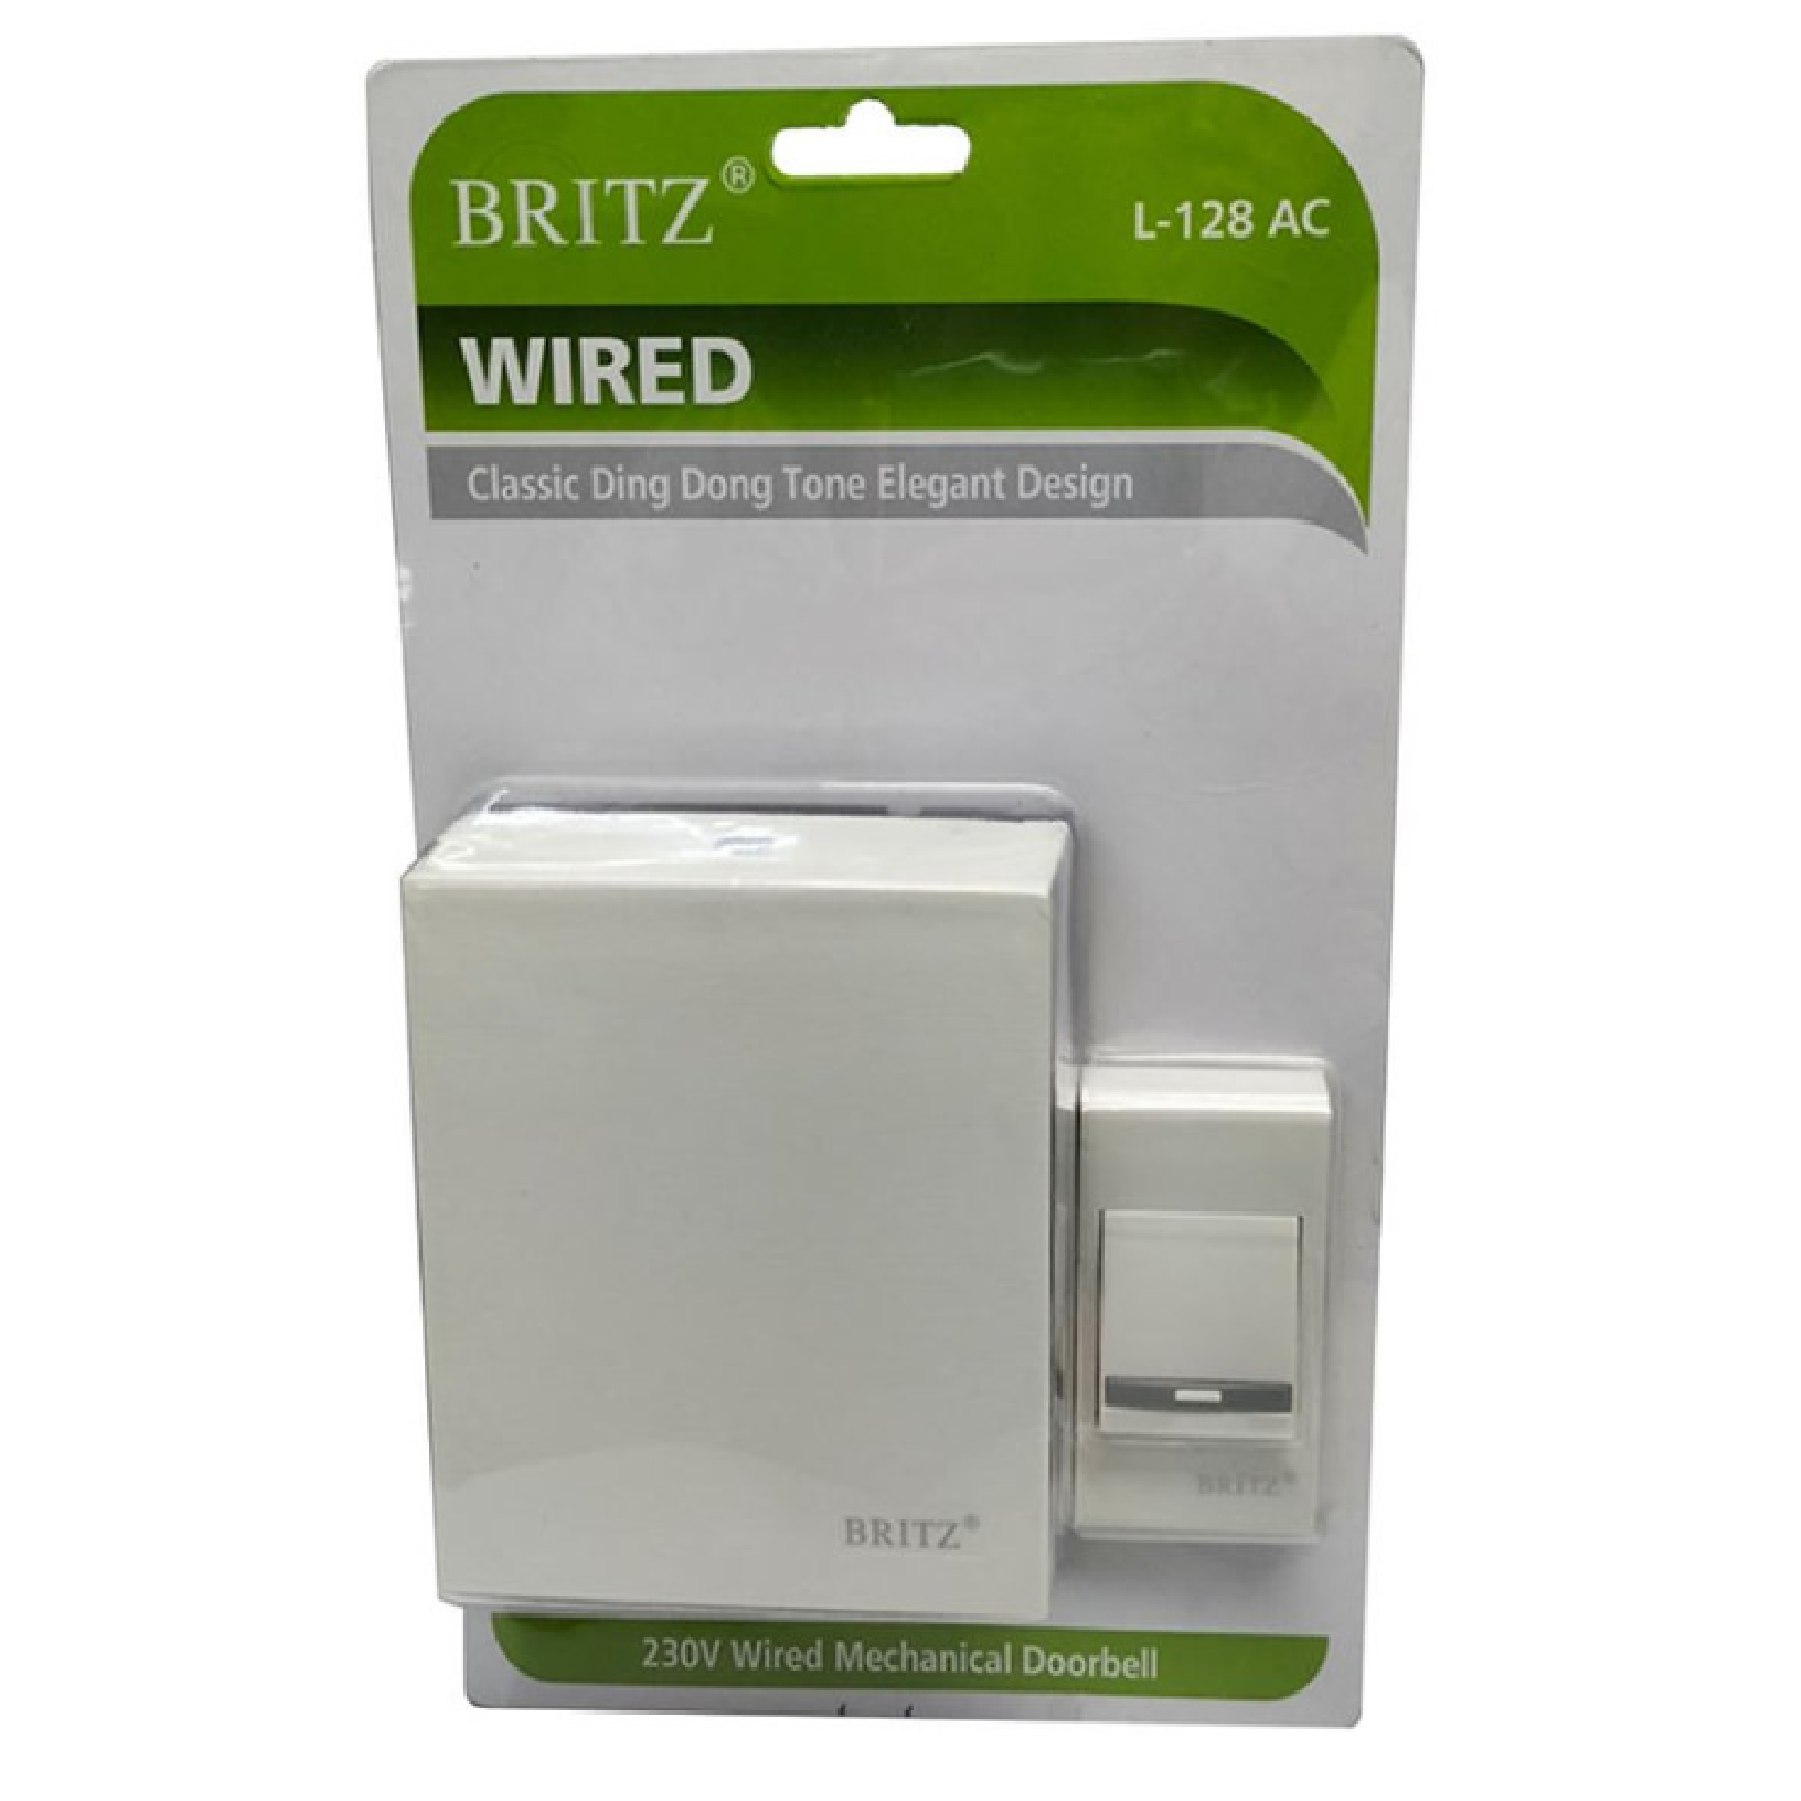 Britz AC Operated Door Chime "DINGDONG" Corded L-128AC